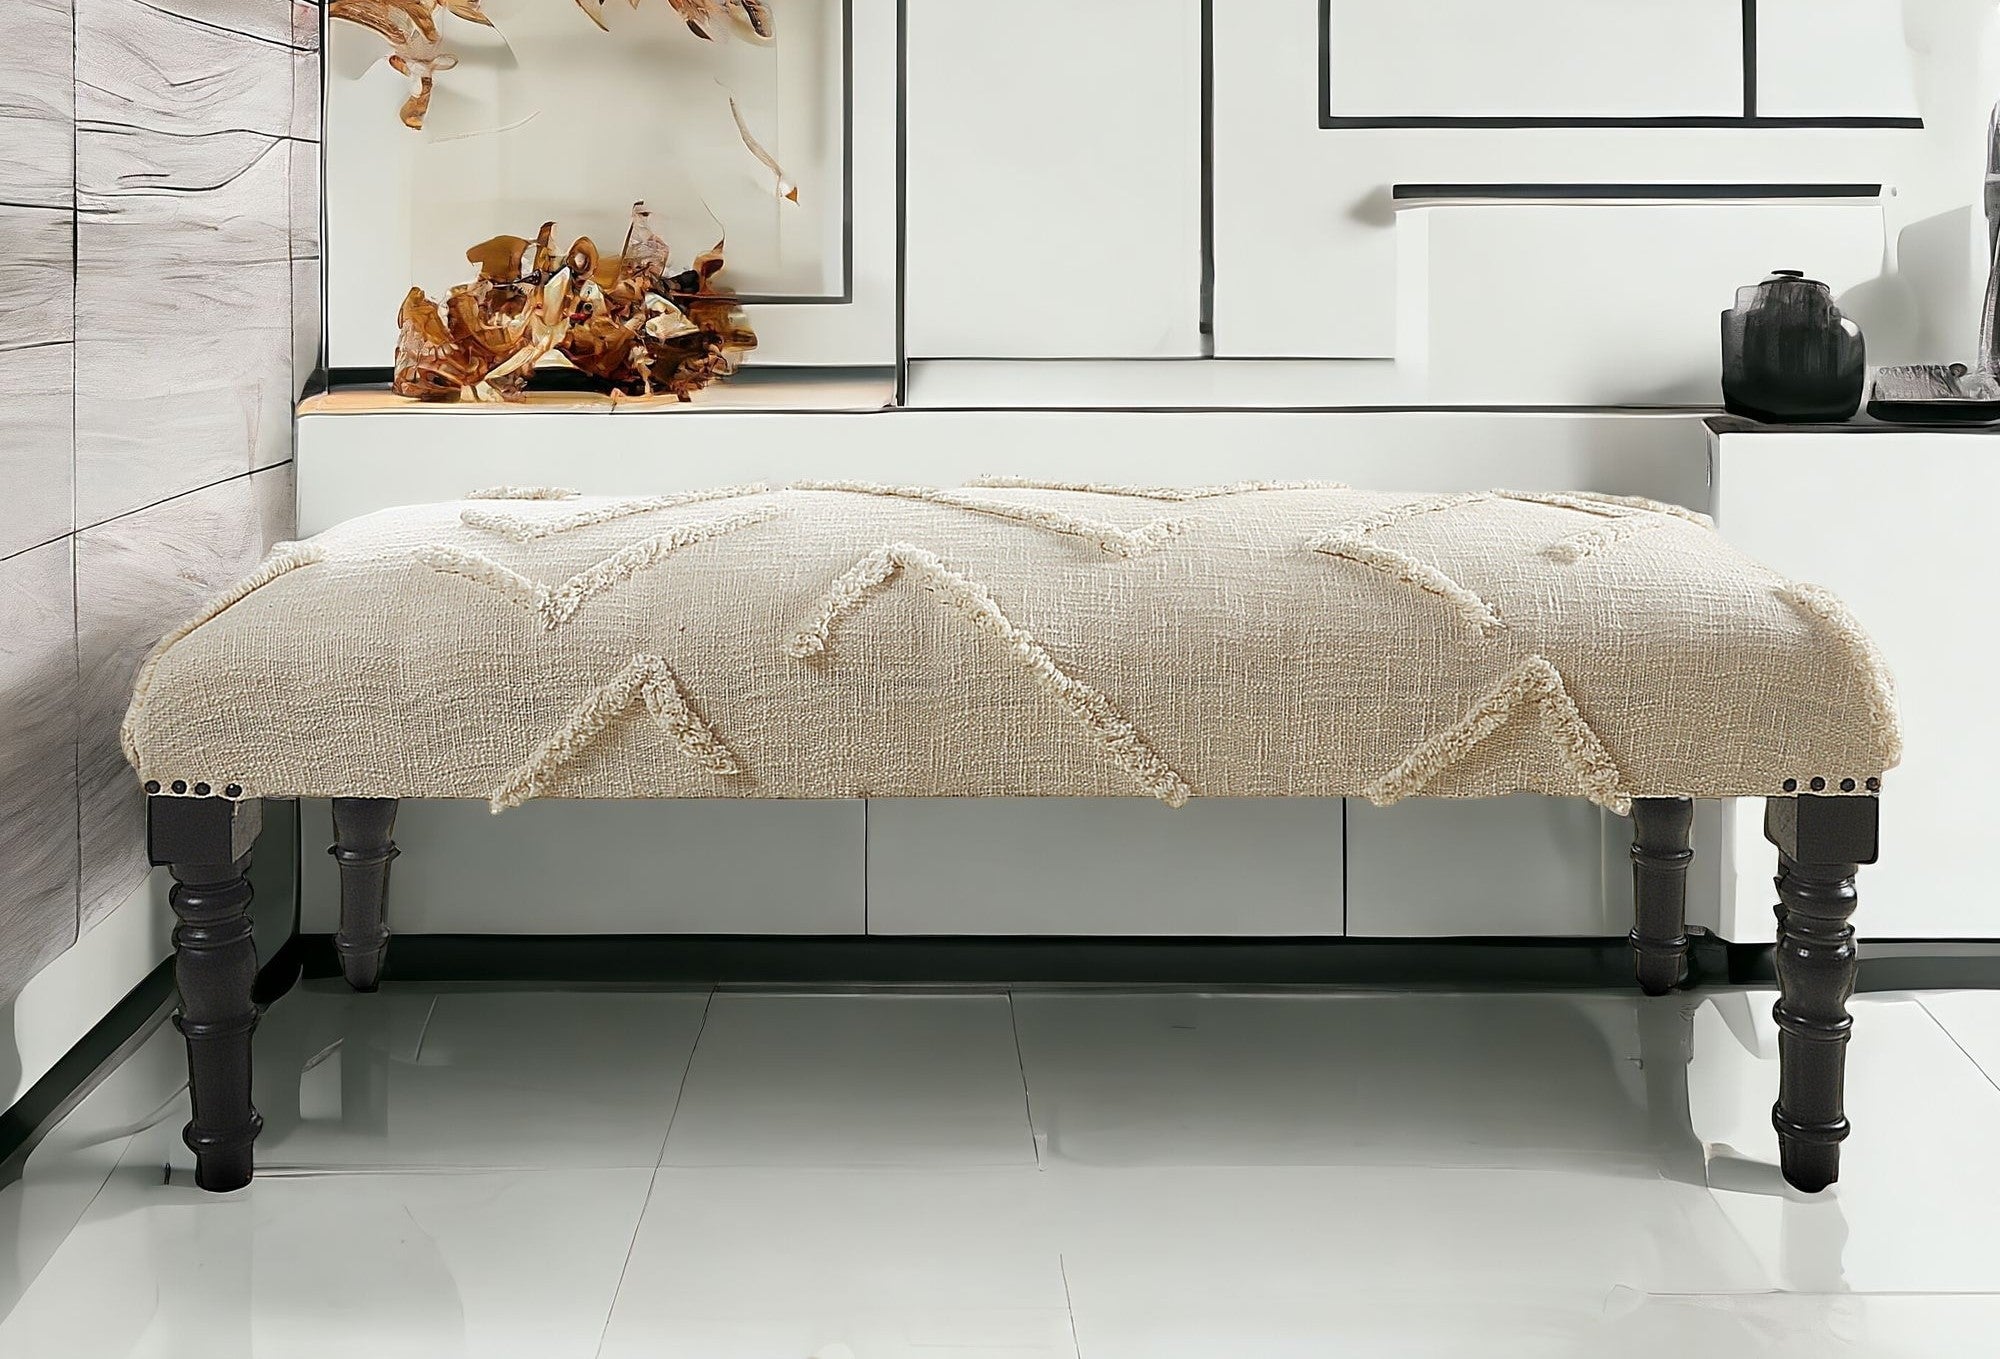 47" Cream And Black Leg Abstract Upholstered Bench